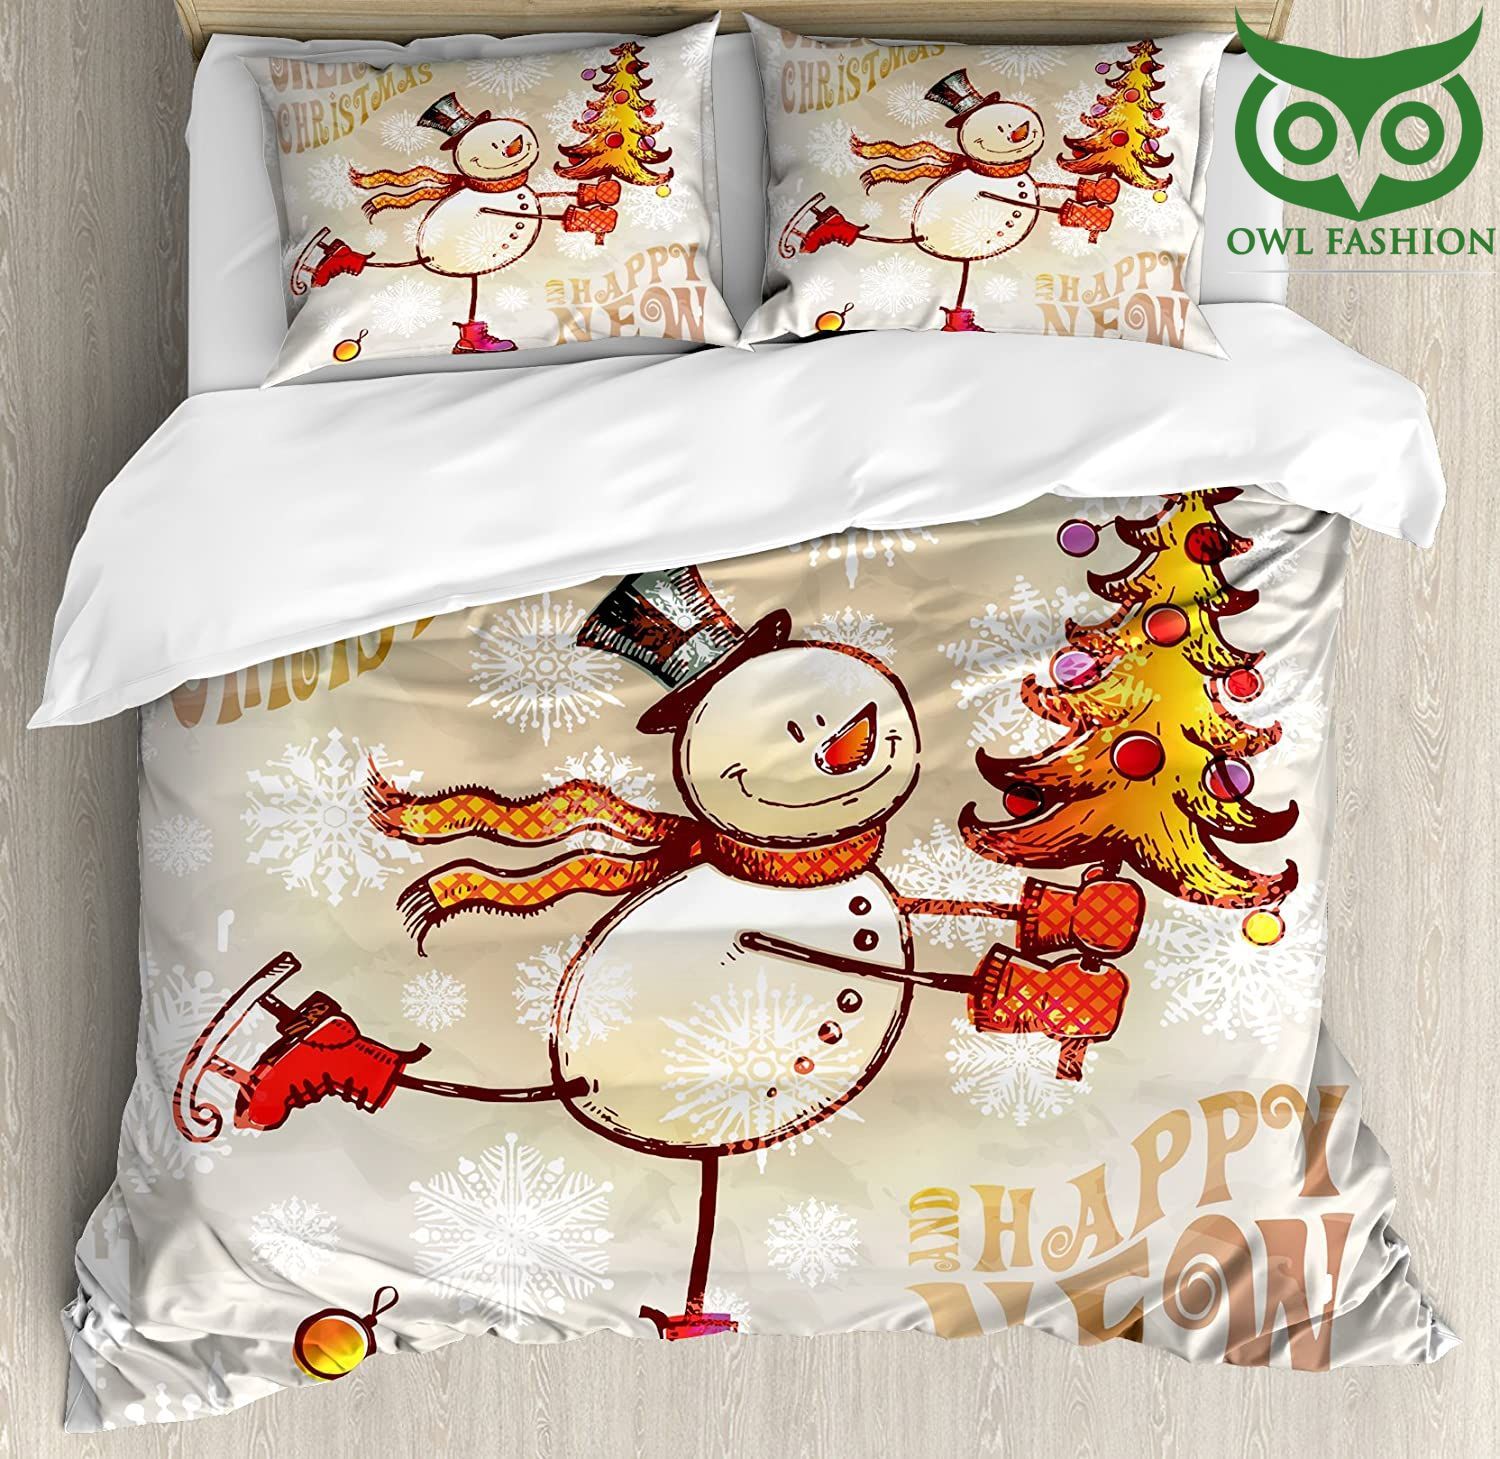 Snowman bedding set Skating Happy Snowman with Christmas Tree Cheerful